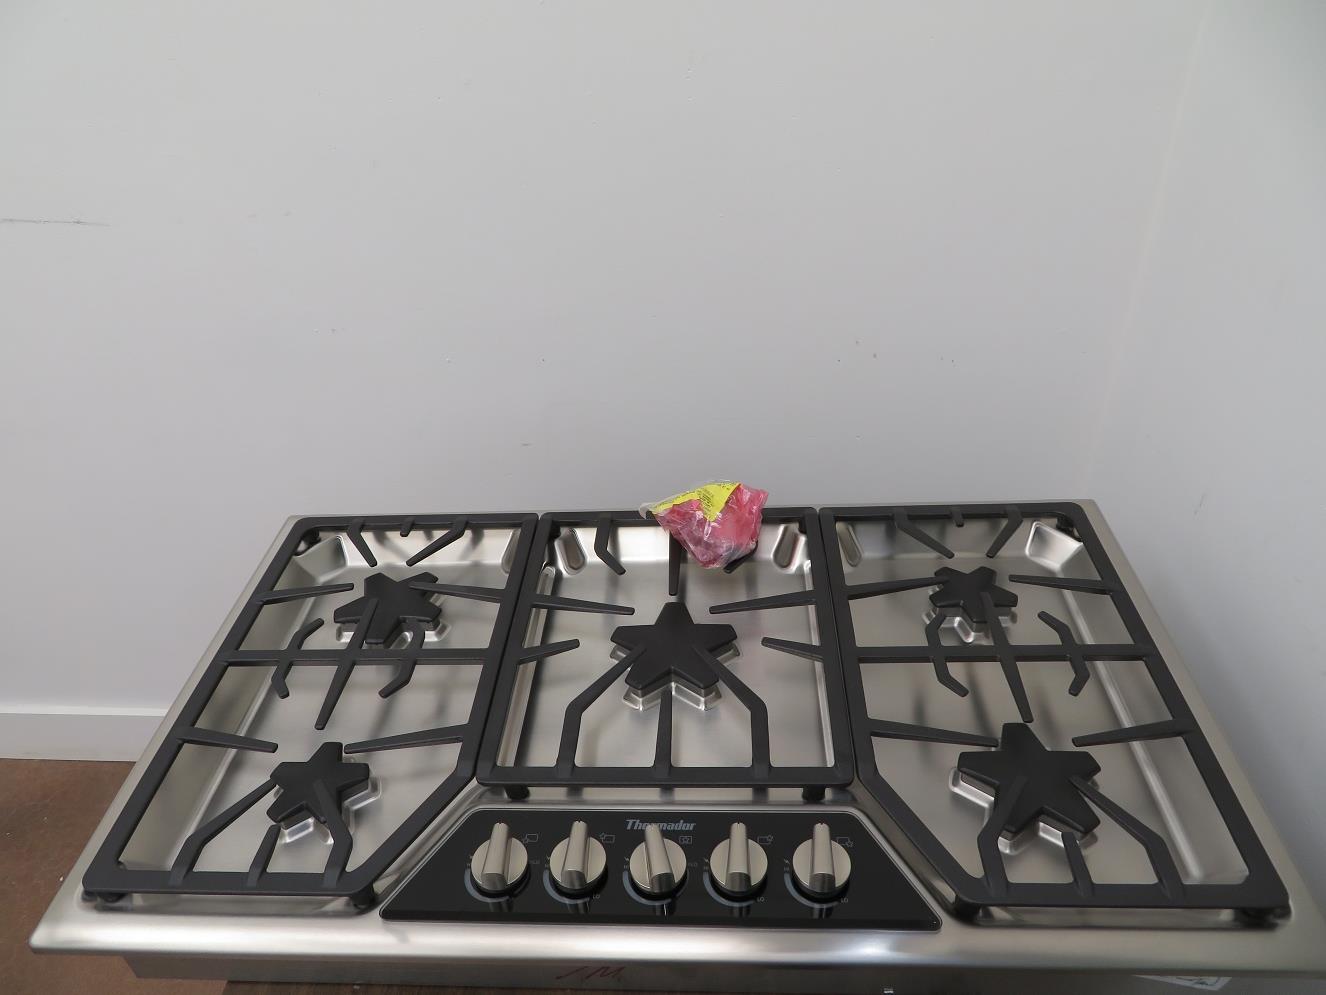 thermador-masterpiece-deluxe-series-36-5-star-burners-gas-cooktop